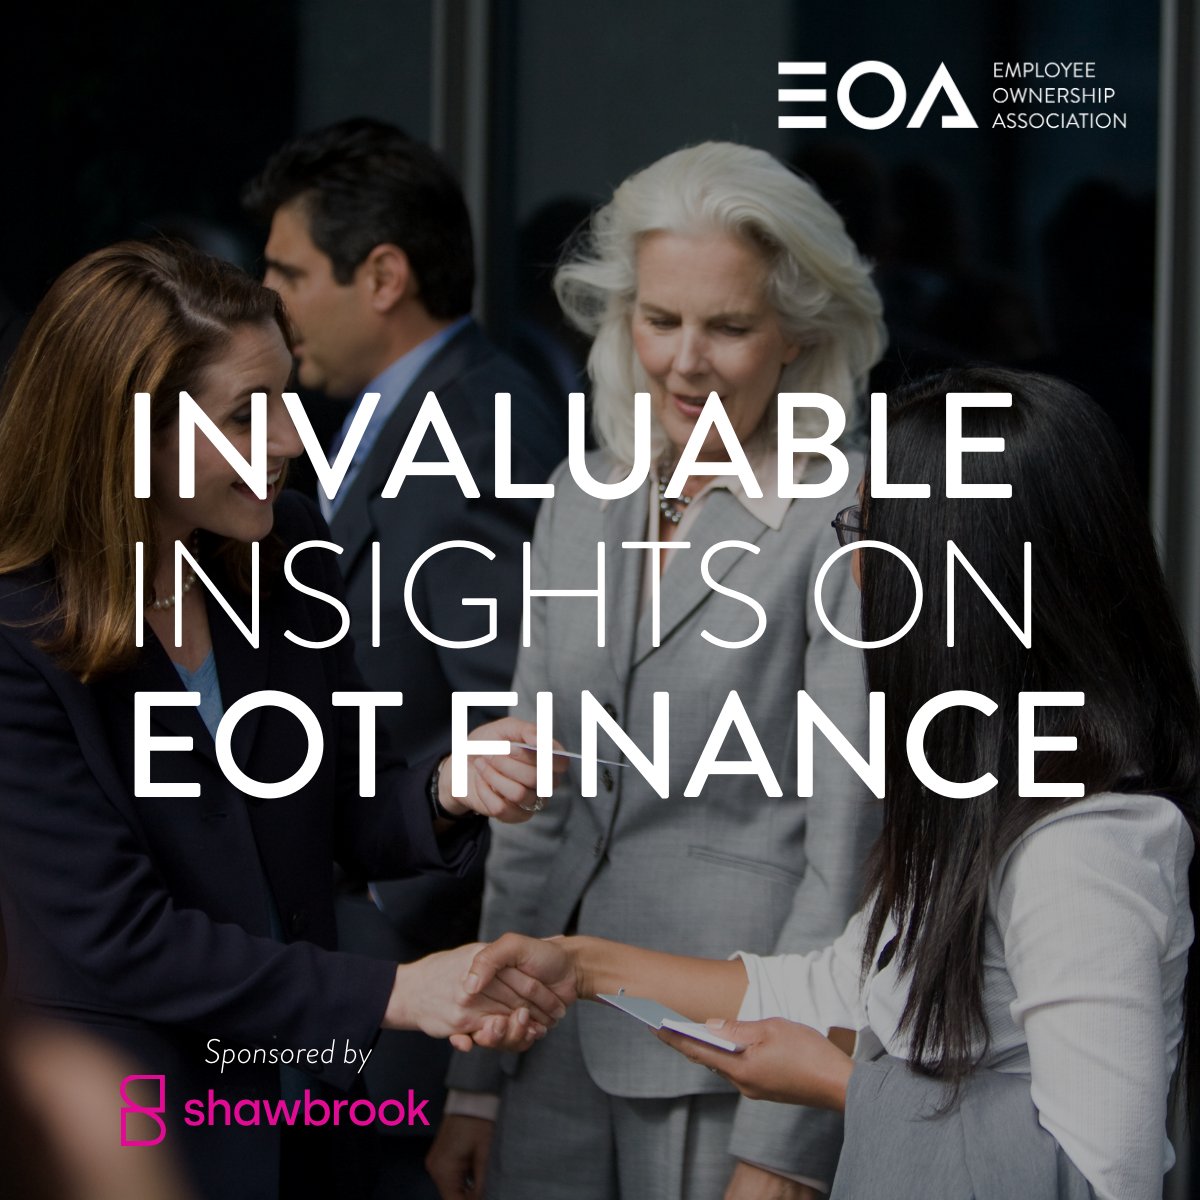 Based in the South East? Looking for insights on EOT finance? Want to build your contacts? Sponsored by @ShawbrookBank, this in-person event has got you covered. We’ll see you there! ➡️ ow.ly/z3Wk50Re3fv 📅 Weds 15 May 🕓 4-7pm 📍 9 Appold St, London EC2A 2AP